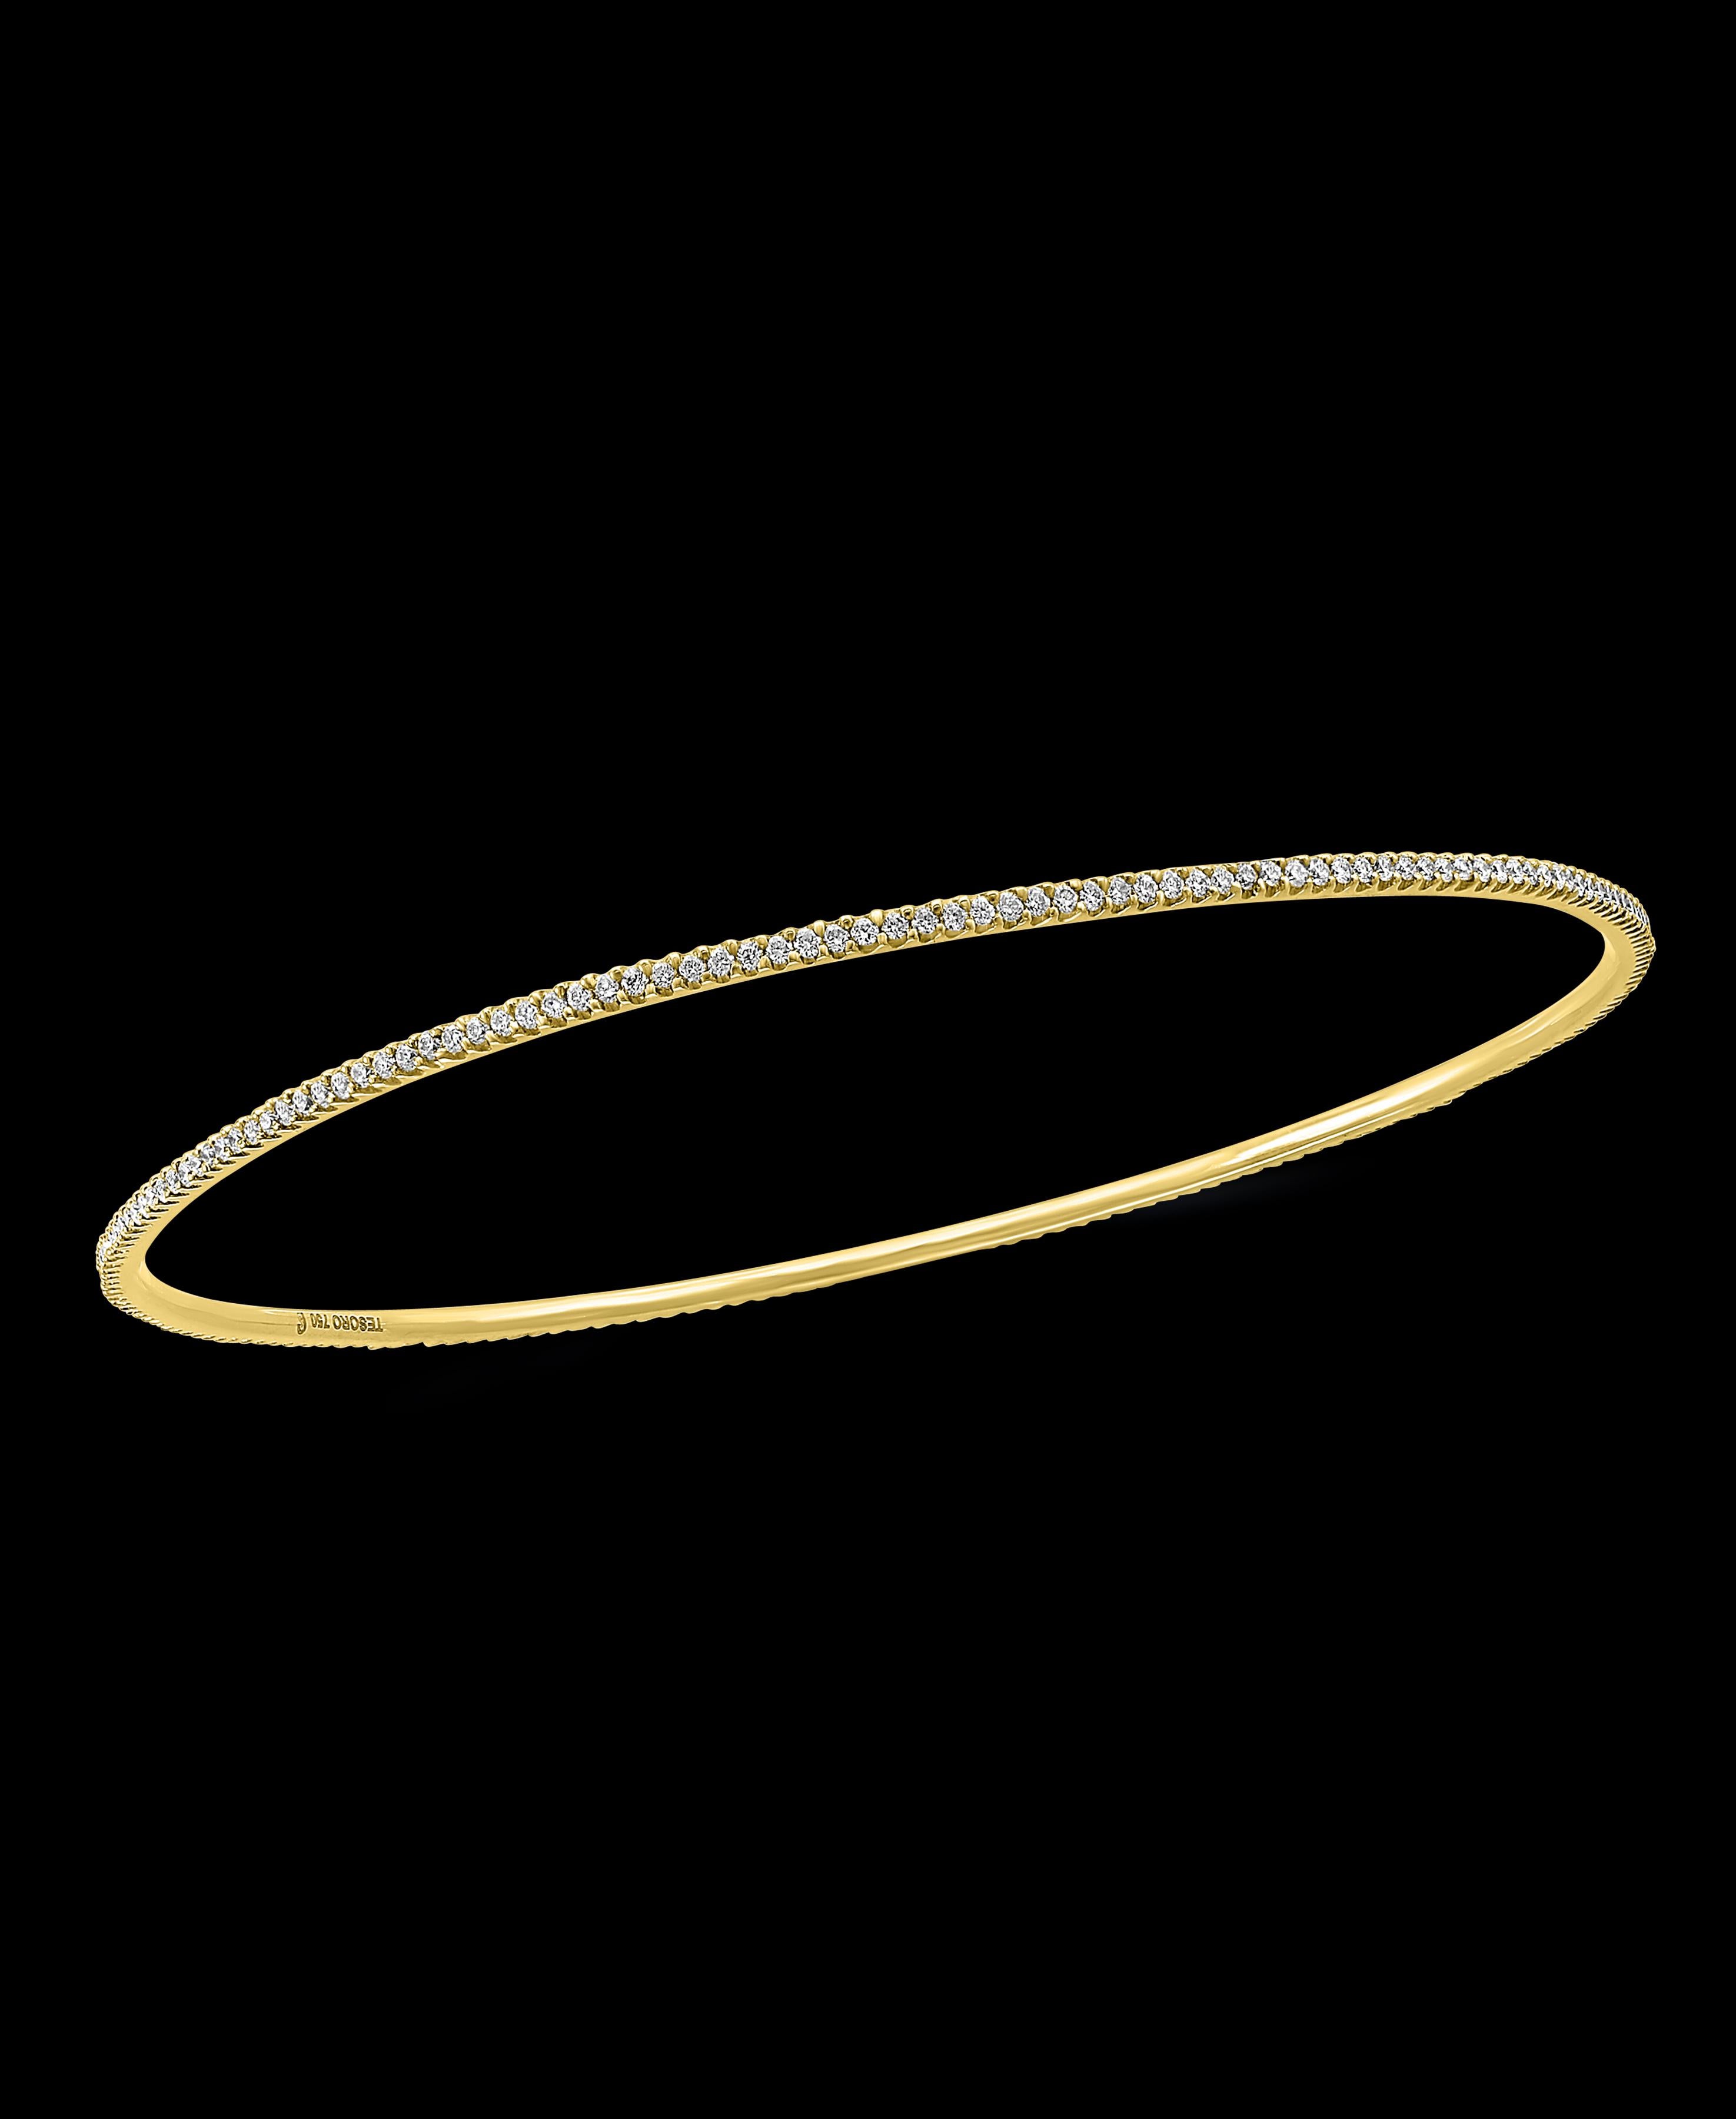 Tesora Contemporary Yellow and White 18 Karat Gold and Diamond Bangle Bracelet In Excellent Condition For Sale In New York, NY